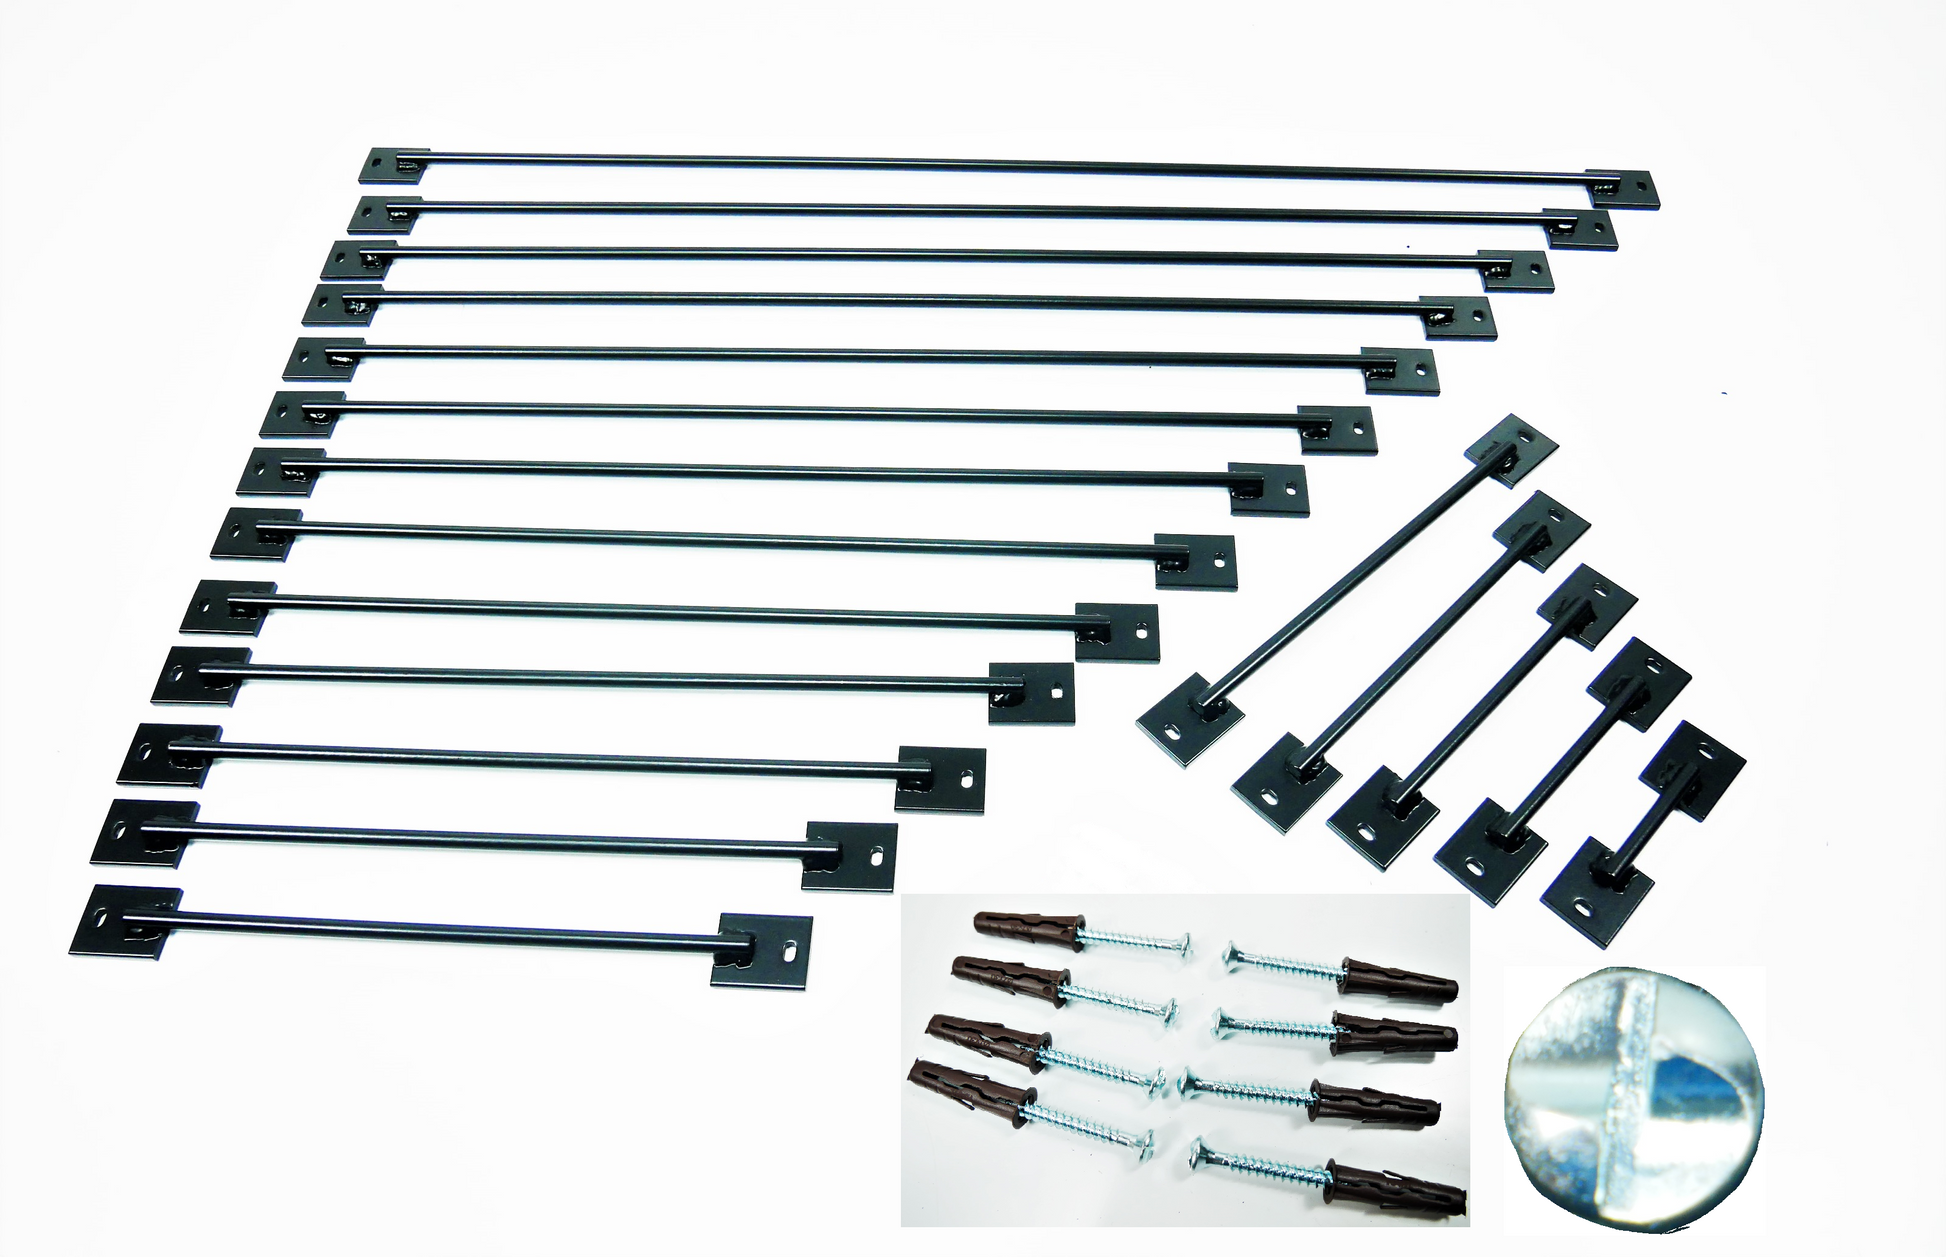 Window Security Bar Black Clutch Head Security Screw Straight Protection Garage Home Office Farm Rustic Shed Industrial Anti Taper, Weldpress Fabrication, Leicester Fabrication